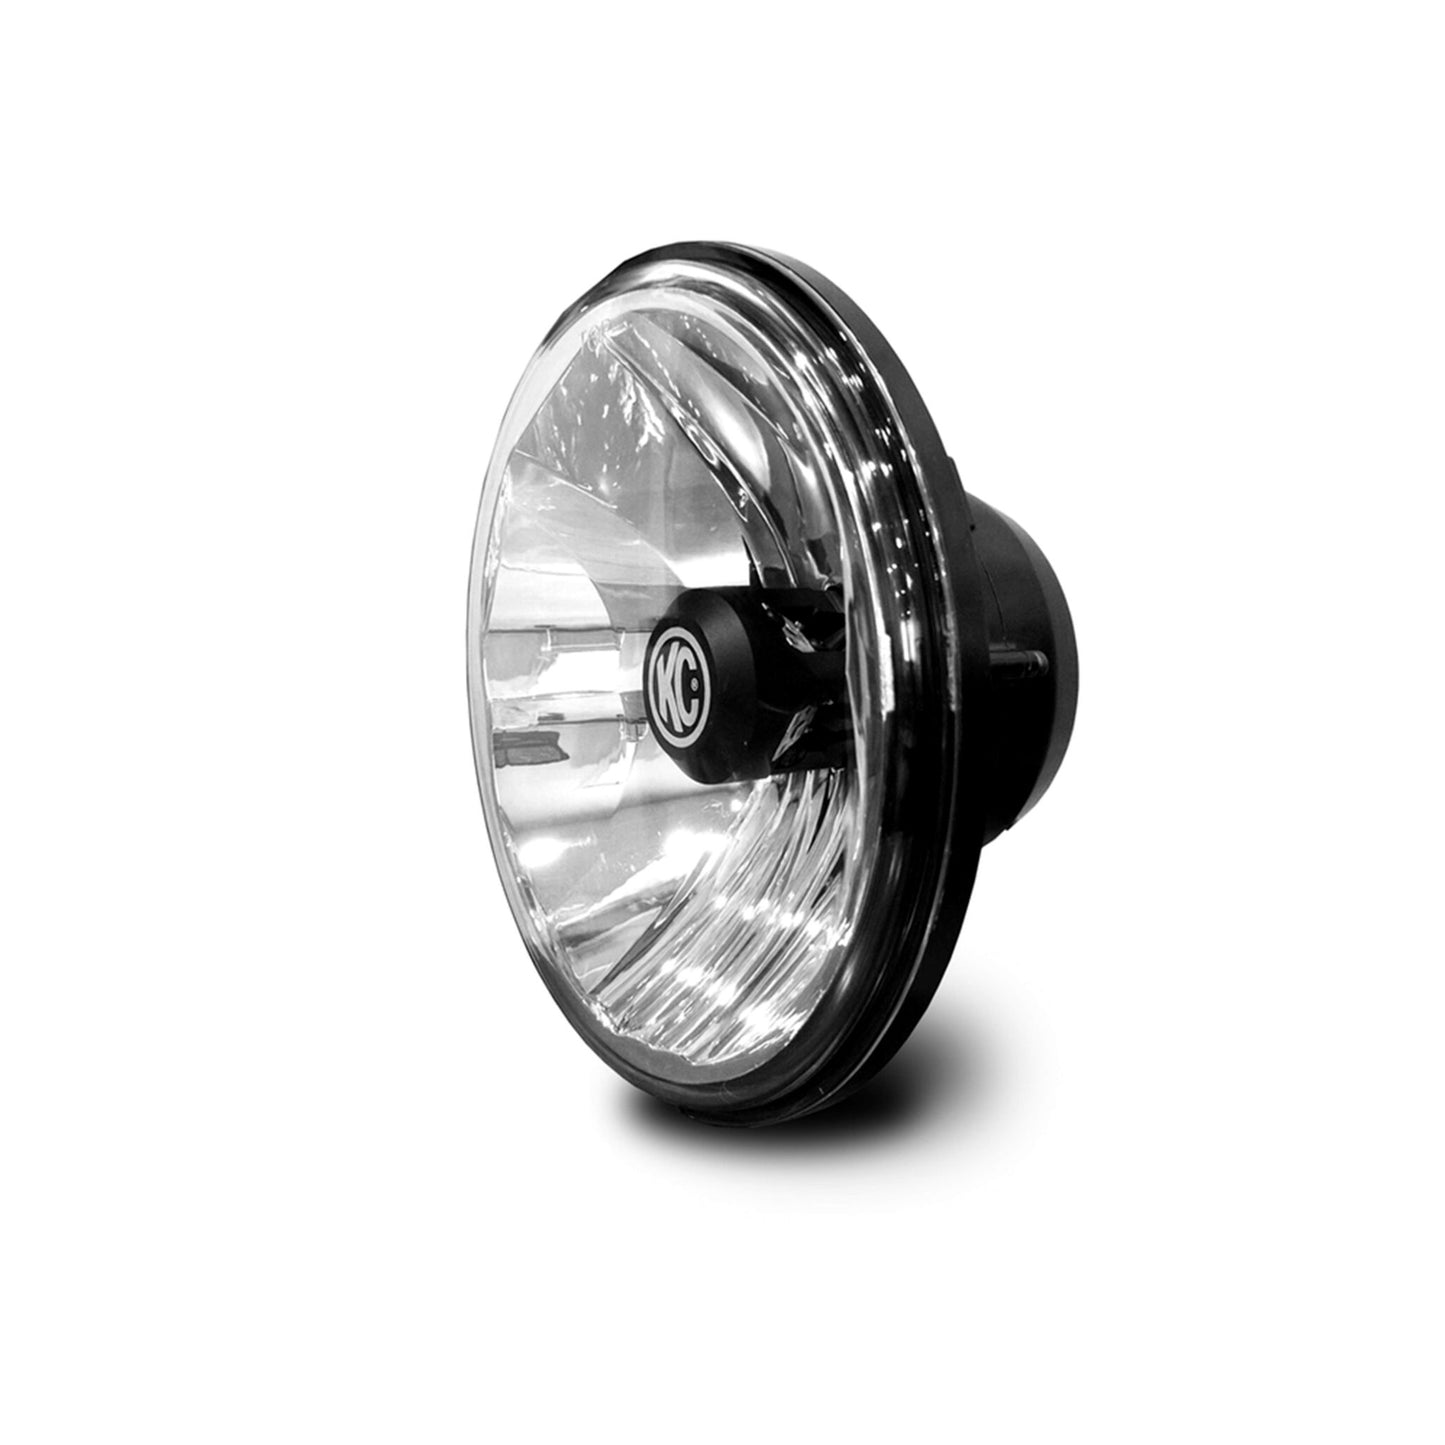 KC HiLiTES 7 in Gravity LED - Single Headlight - SAE/ECE - 40W Driving Beam - for 07-18 Jeep JK 4235